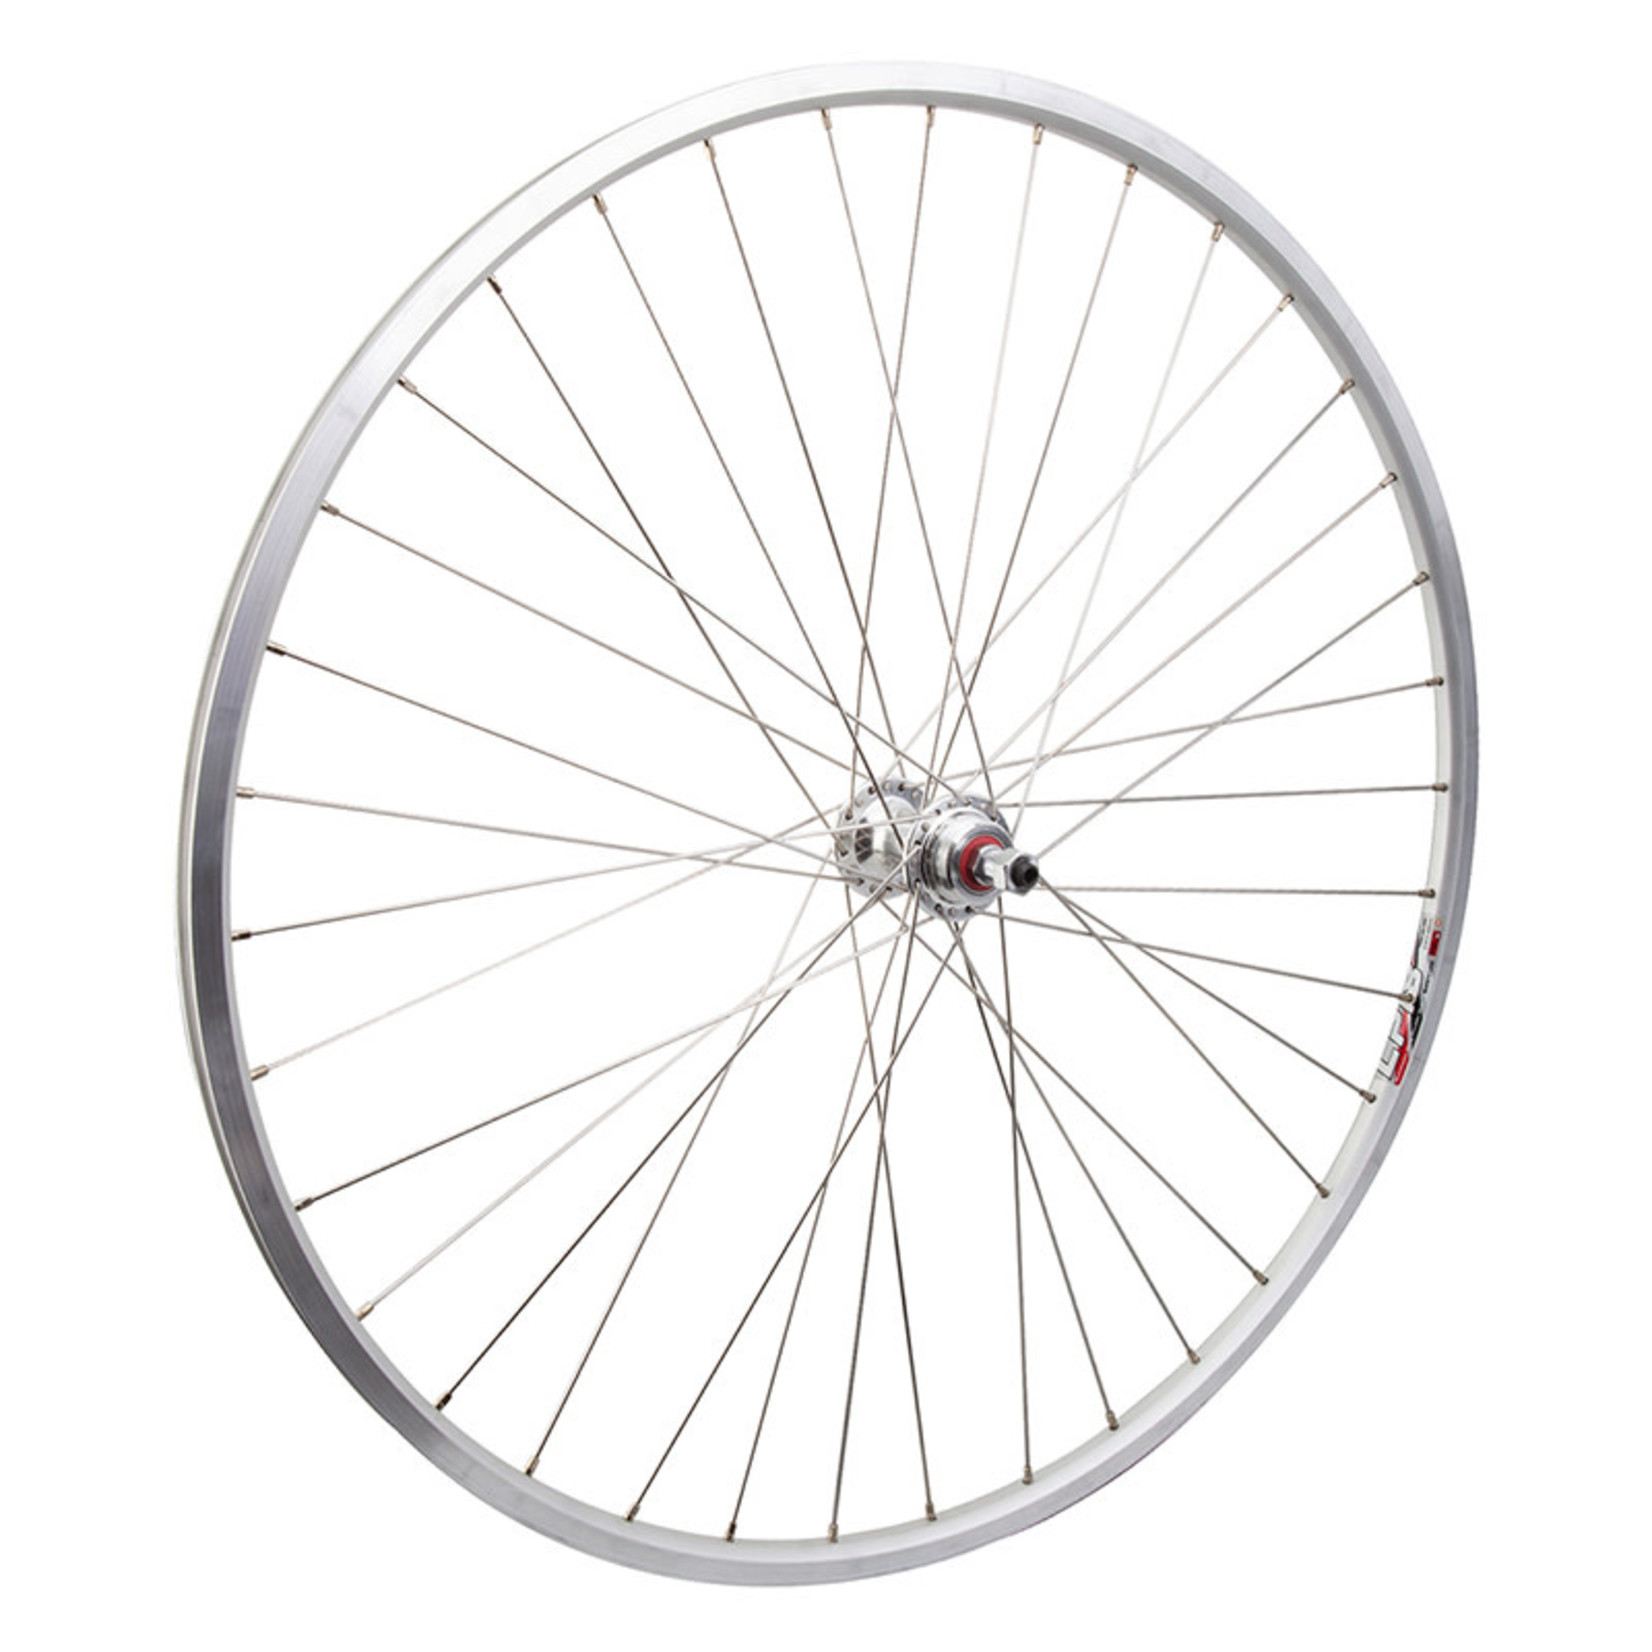 Wheel Master 700C Alloy Road Double Wall Rear Wheel FW QR Sealed Bearings 126mm Stainless Spokes Silver